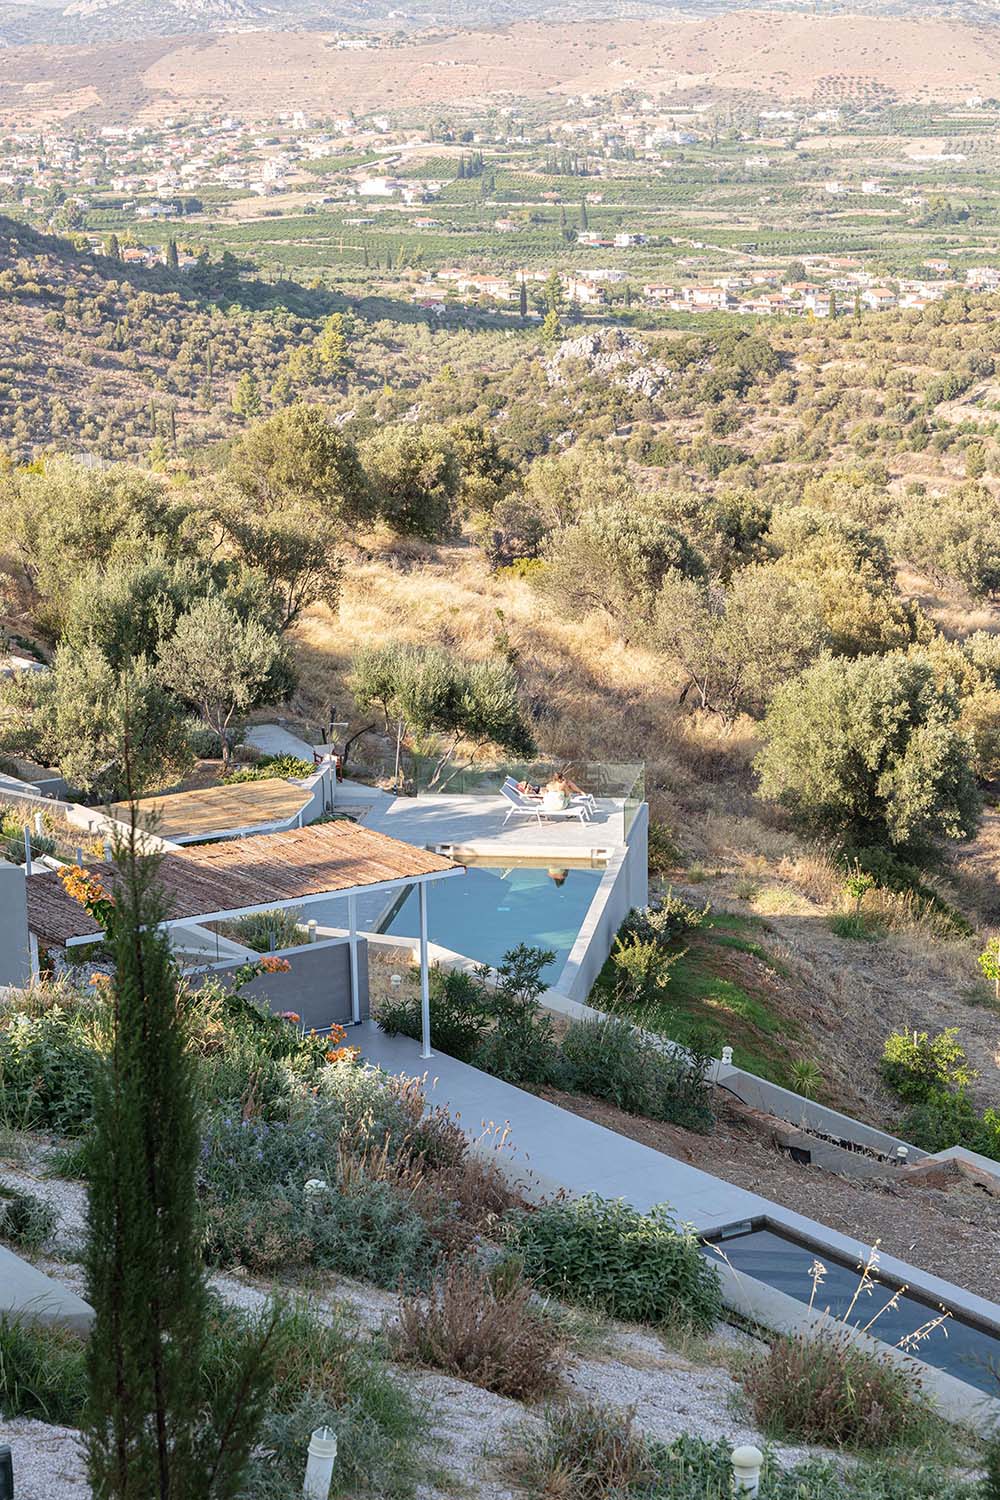 A modern house built into the hillside has a terrace with a pool.